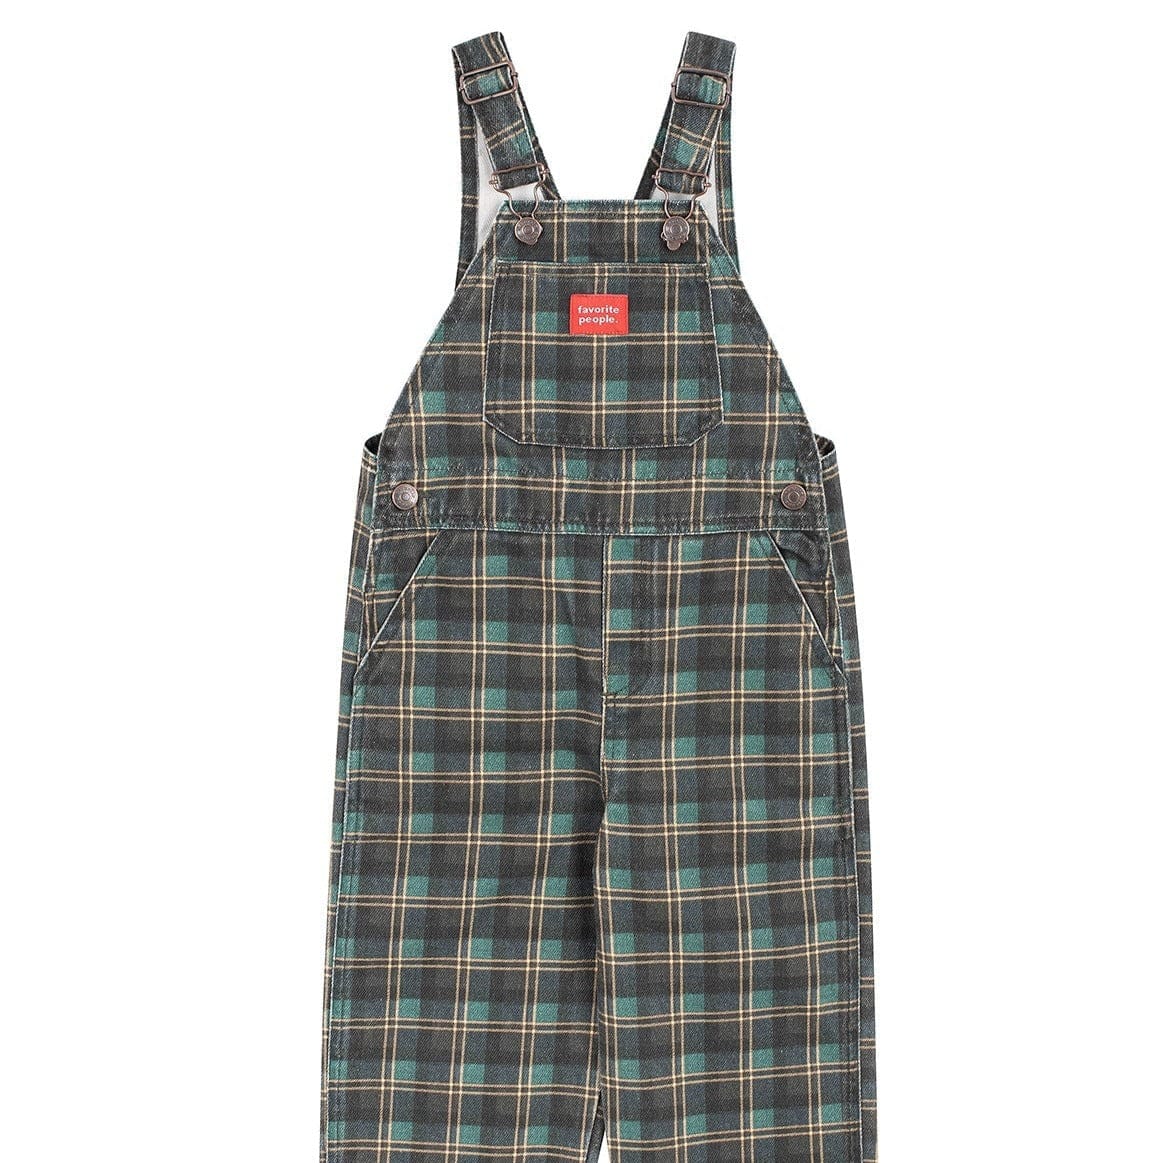 Favorite People Dungarees Kids 'Little Prince' Check Dungarees